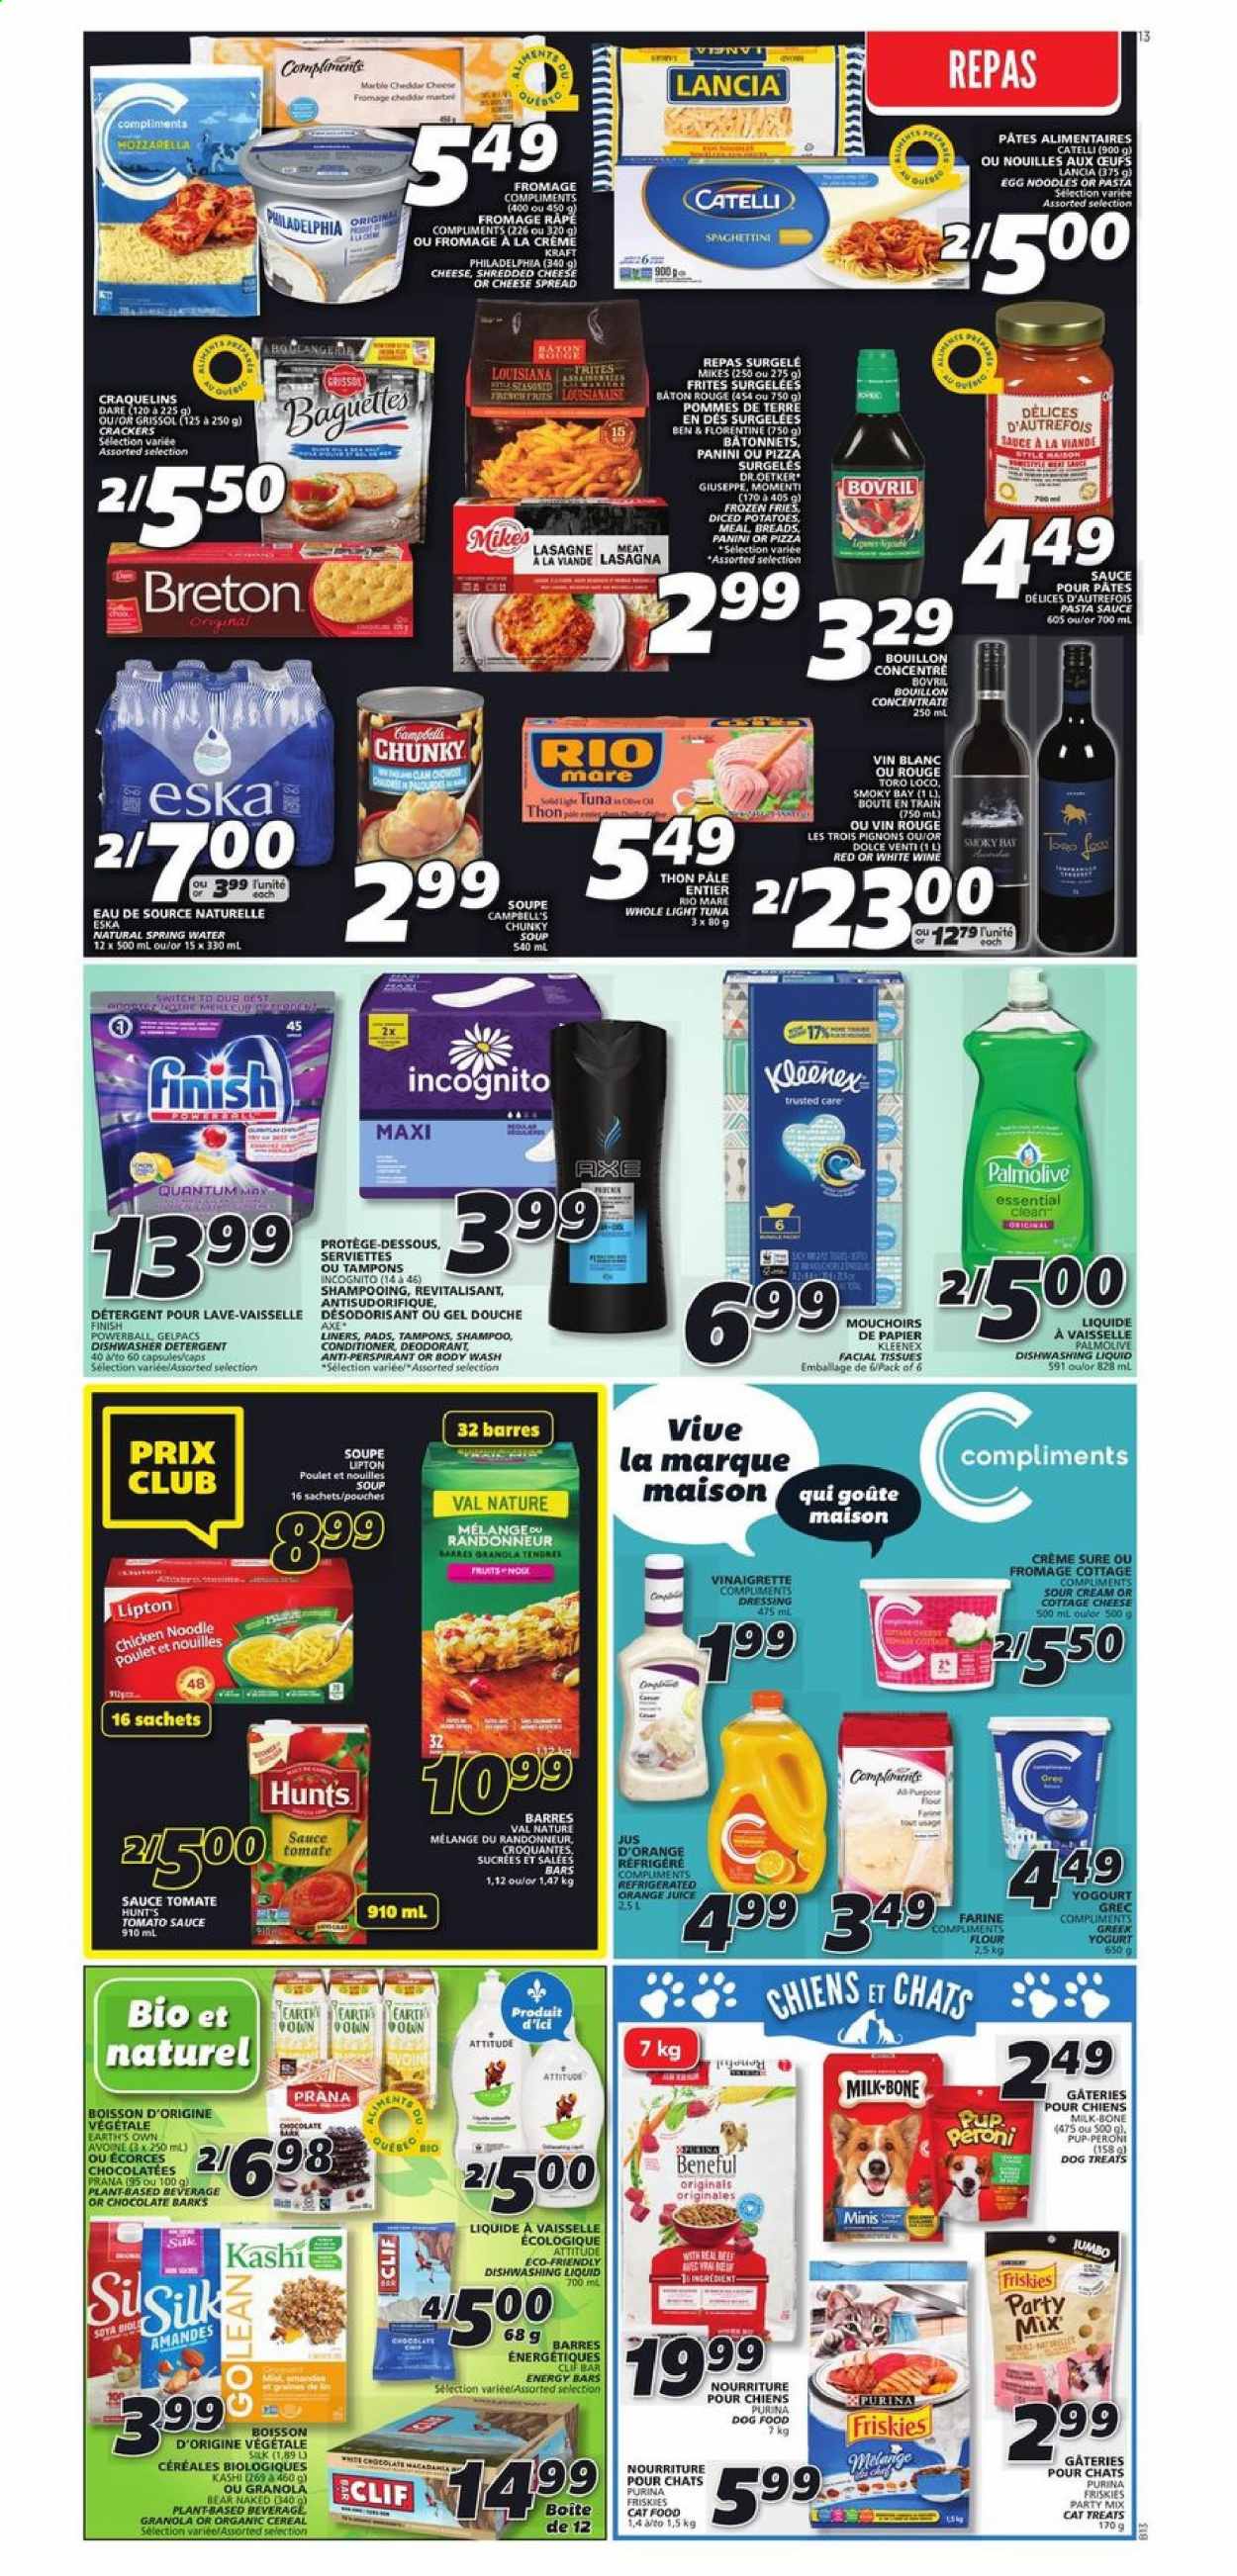 thumbnail - IGA Flyer - January 14, 2021 - January 20, 2021 - Sales products - panini, potatoes, Campbell's, diced potatoes, pizza, pasta sauce, soup, sauce, noodles, lasagna meal, Kraft®, cheese spread, cottage cheese, shredded cheese, greek yoghurt, yoghurt, milk, sour cream, potato fries, chocolate, crackers, bouillon, flour, tomato sauce, light tuna, cereals, energy bar, egg noodles, vinaigrette dressing, dressing, switch, orange juice, juice, spring water, Peroni, granola. Page 9.